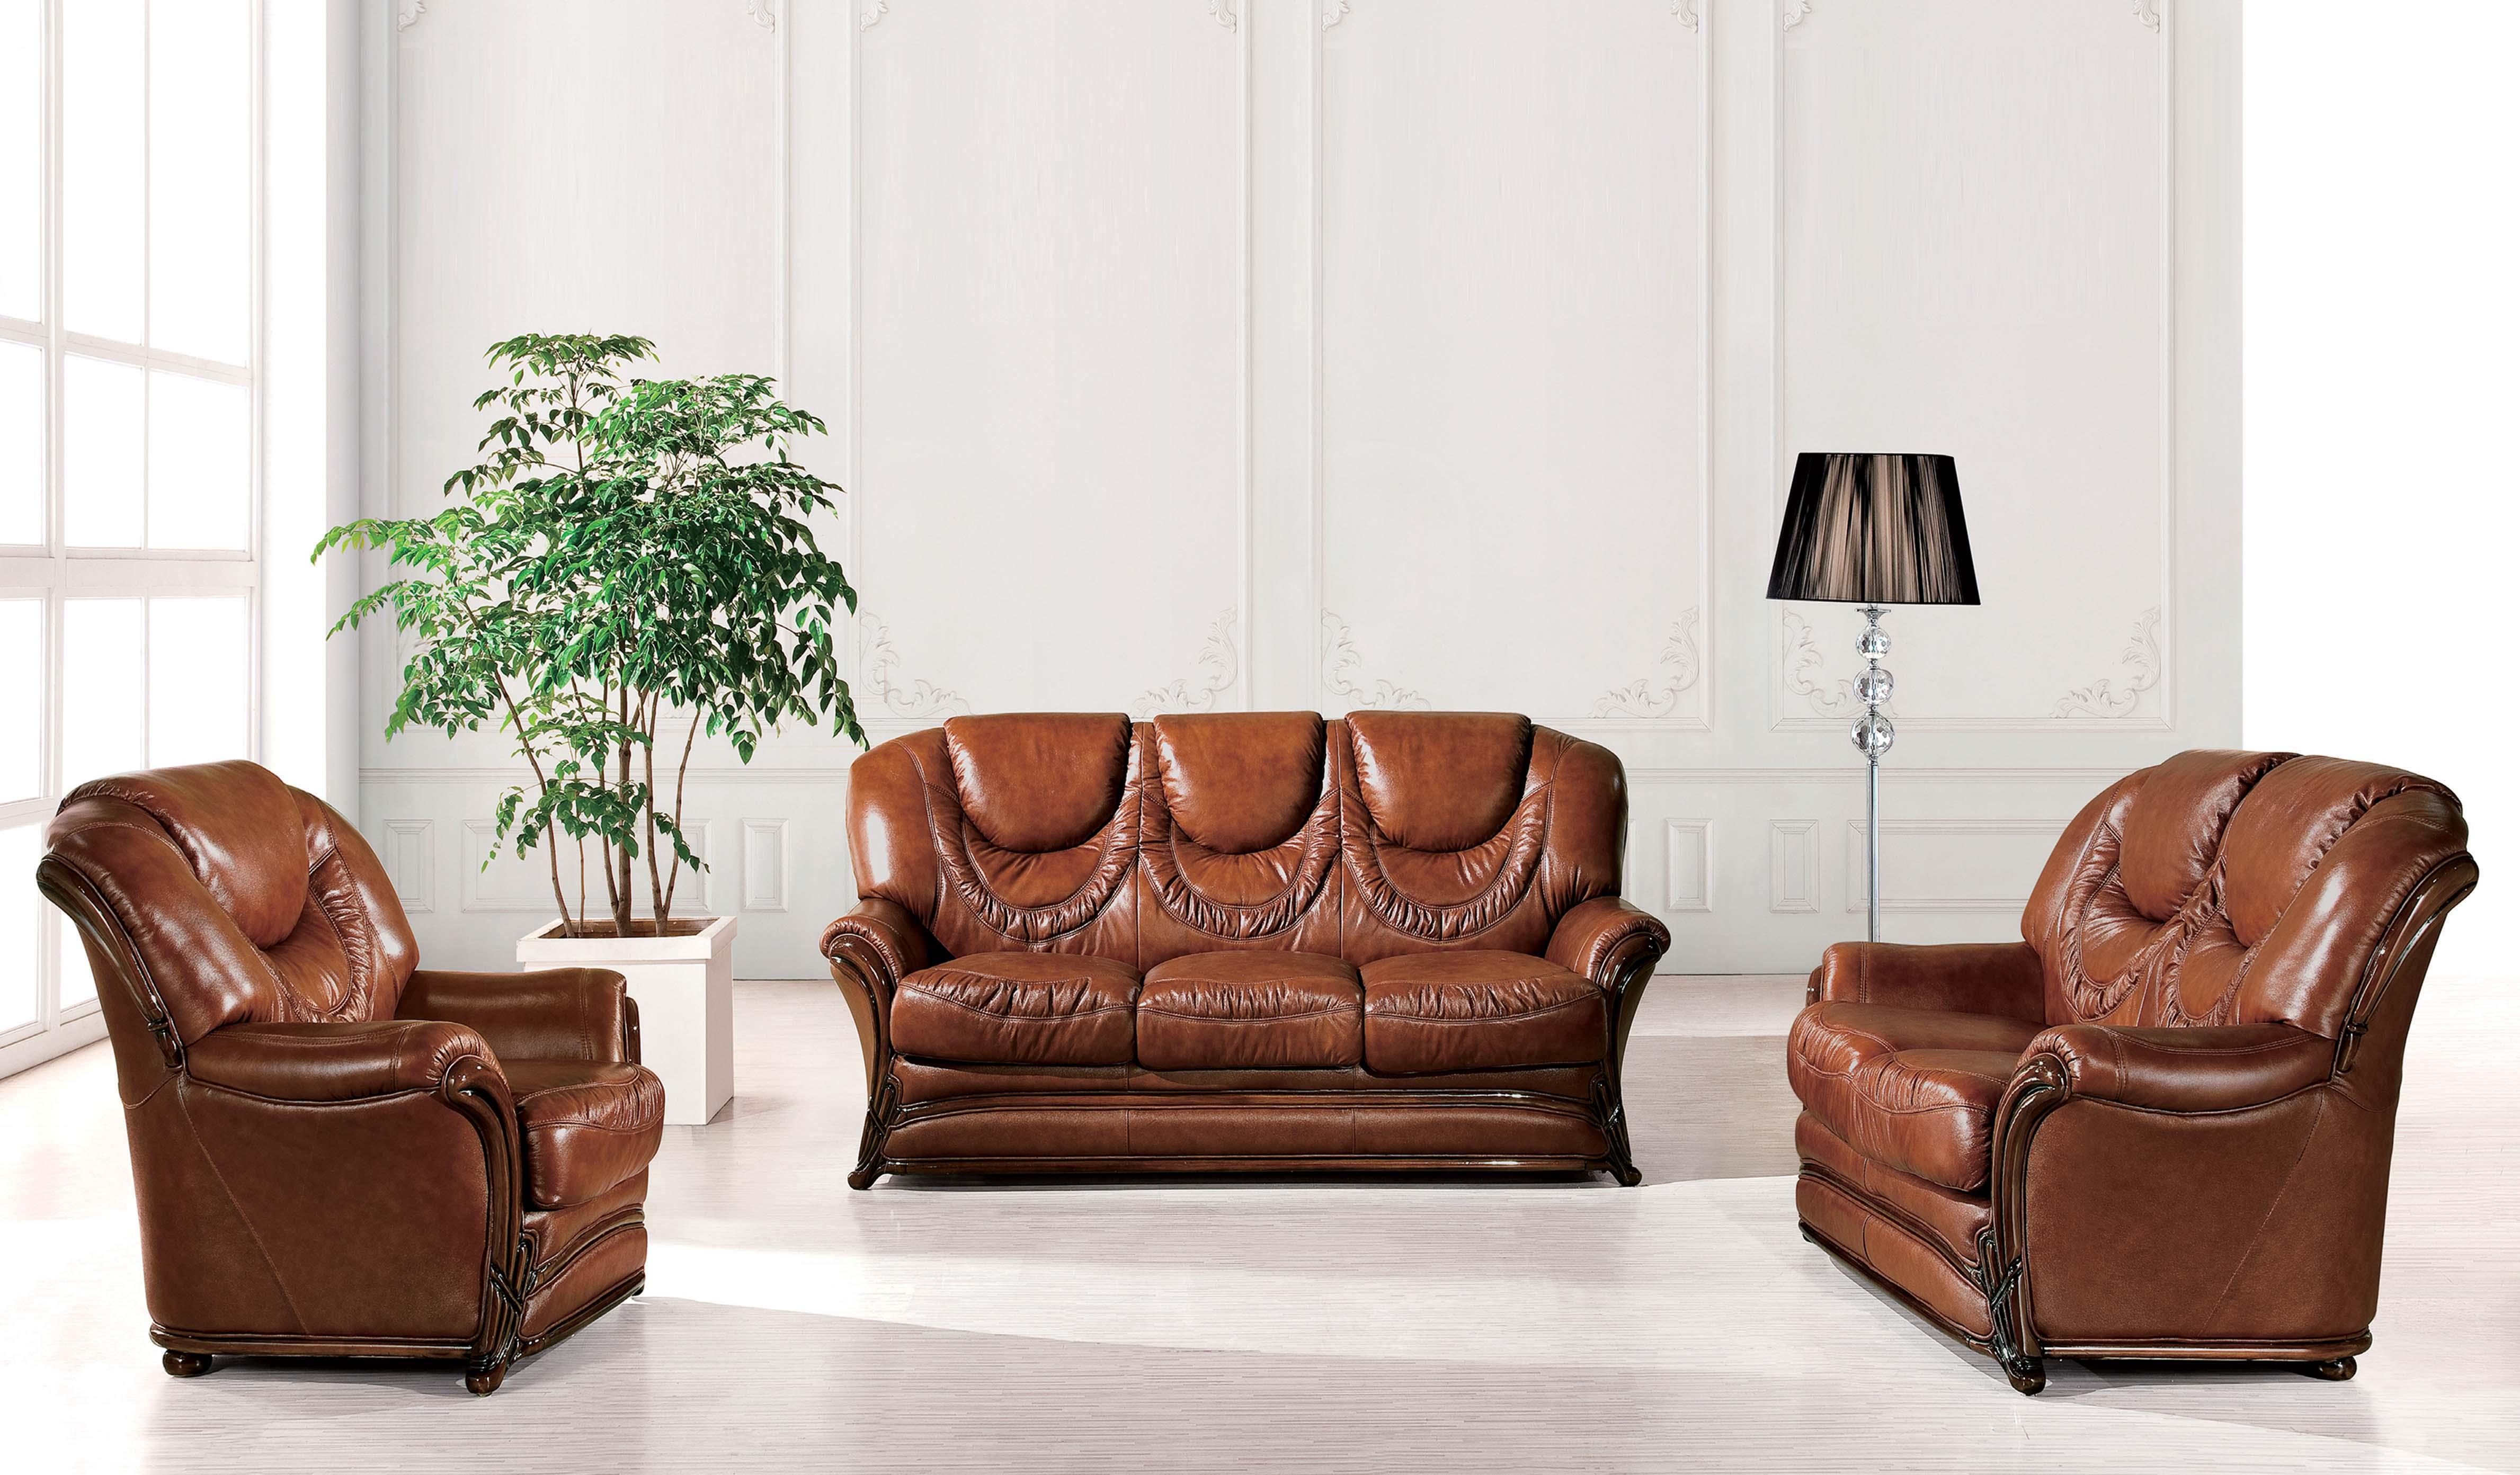 Contemporary Sofa Loveseat and Chair Set LH2081-BR-S/L/C LH2081-BR-Sofa Set-3 in Brown Bonded Leather